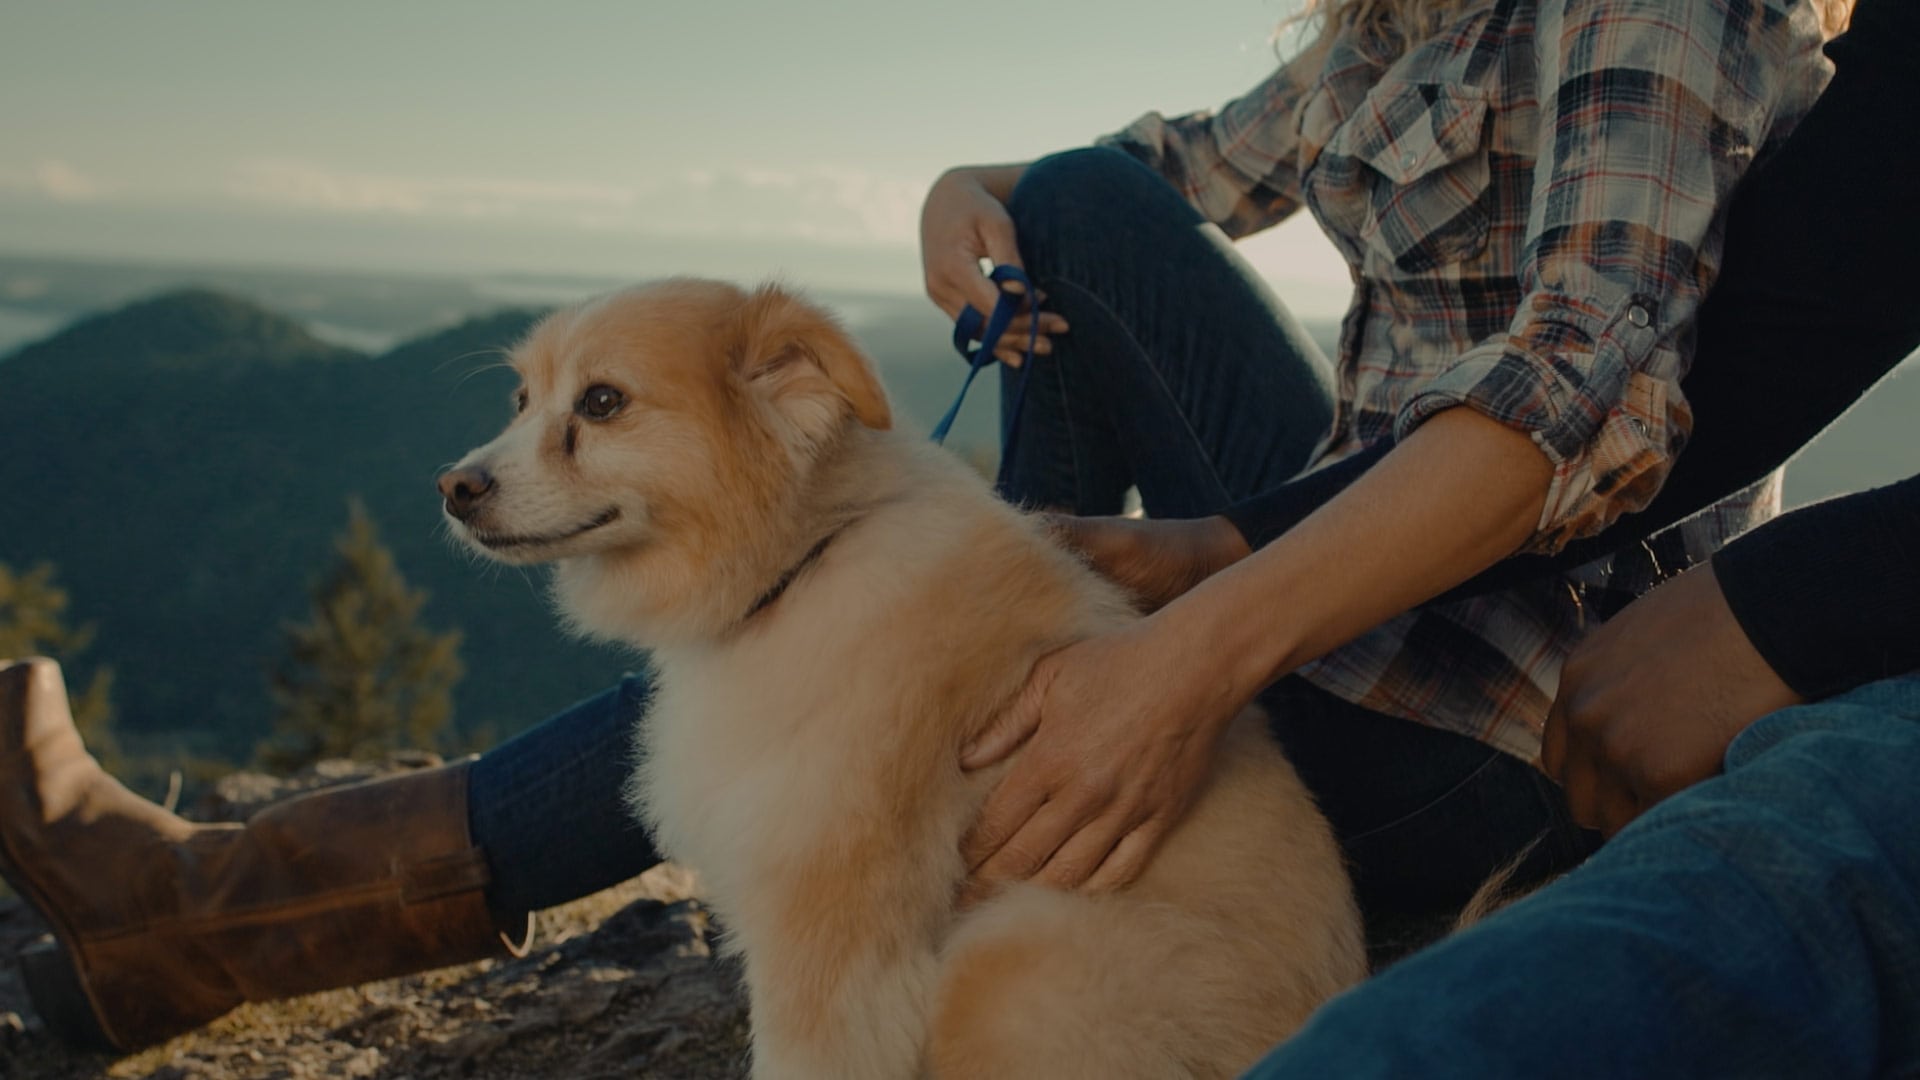 A shot of a dog in a branded documentary